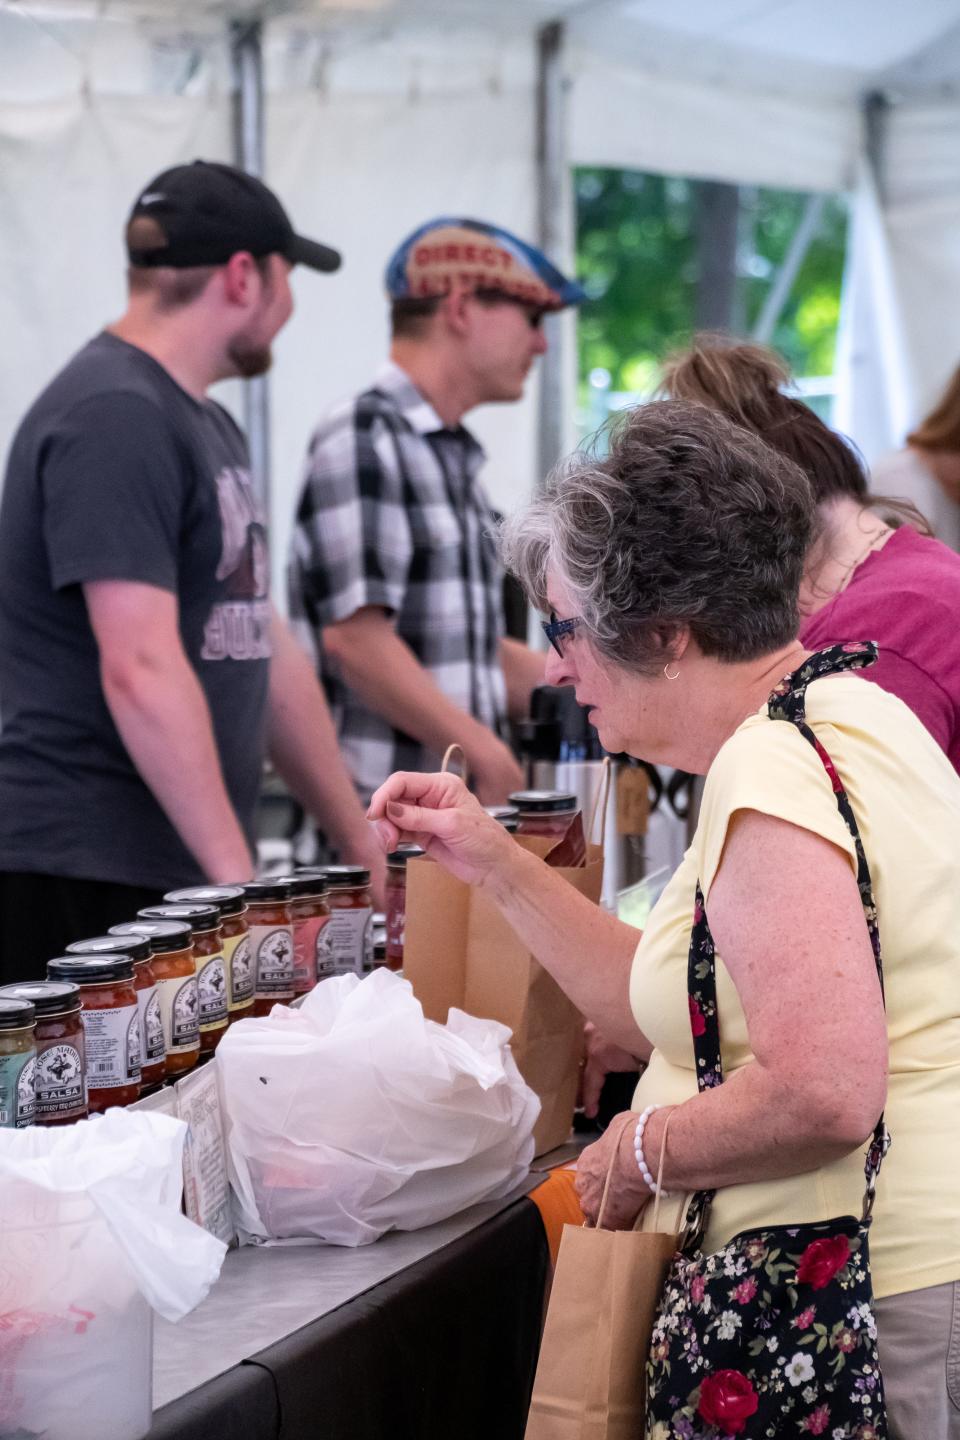 Shoppers peruse various goodies from vendors in the Marketplace Tent at the 2023 Salt Fork Arts & Crafts Festival. Shirley Goodpastor, a Culinary Challenge competitor, had her famous baklava available to purchase in the tent.